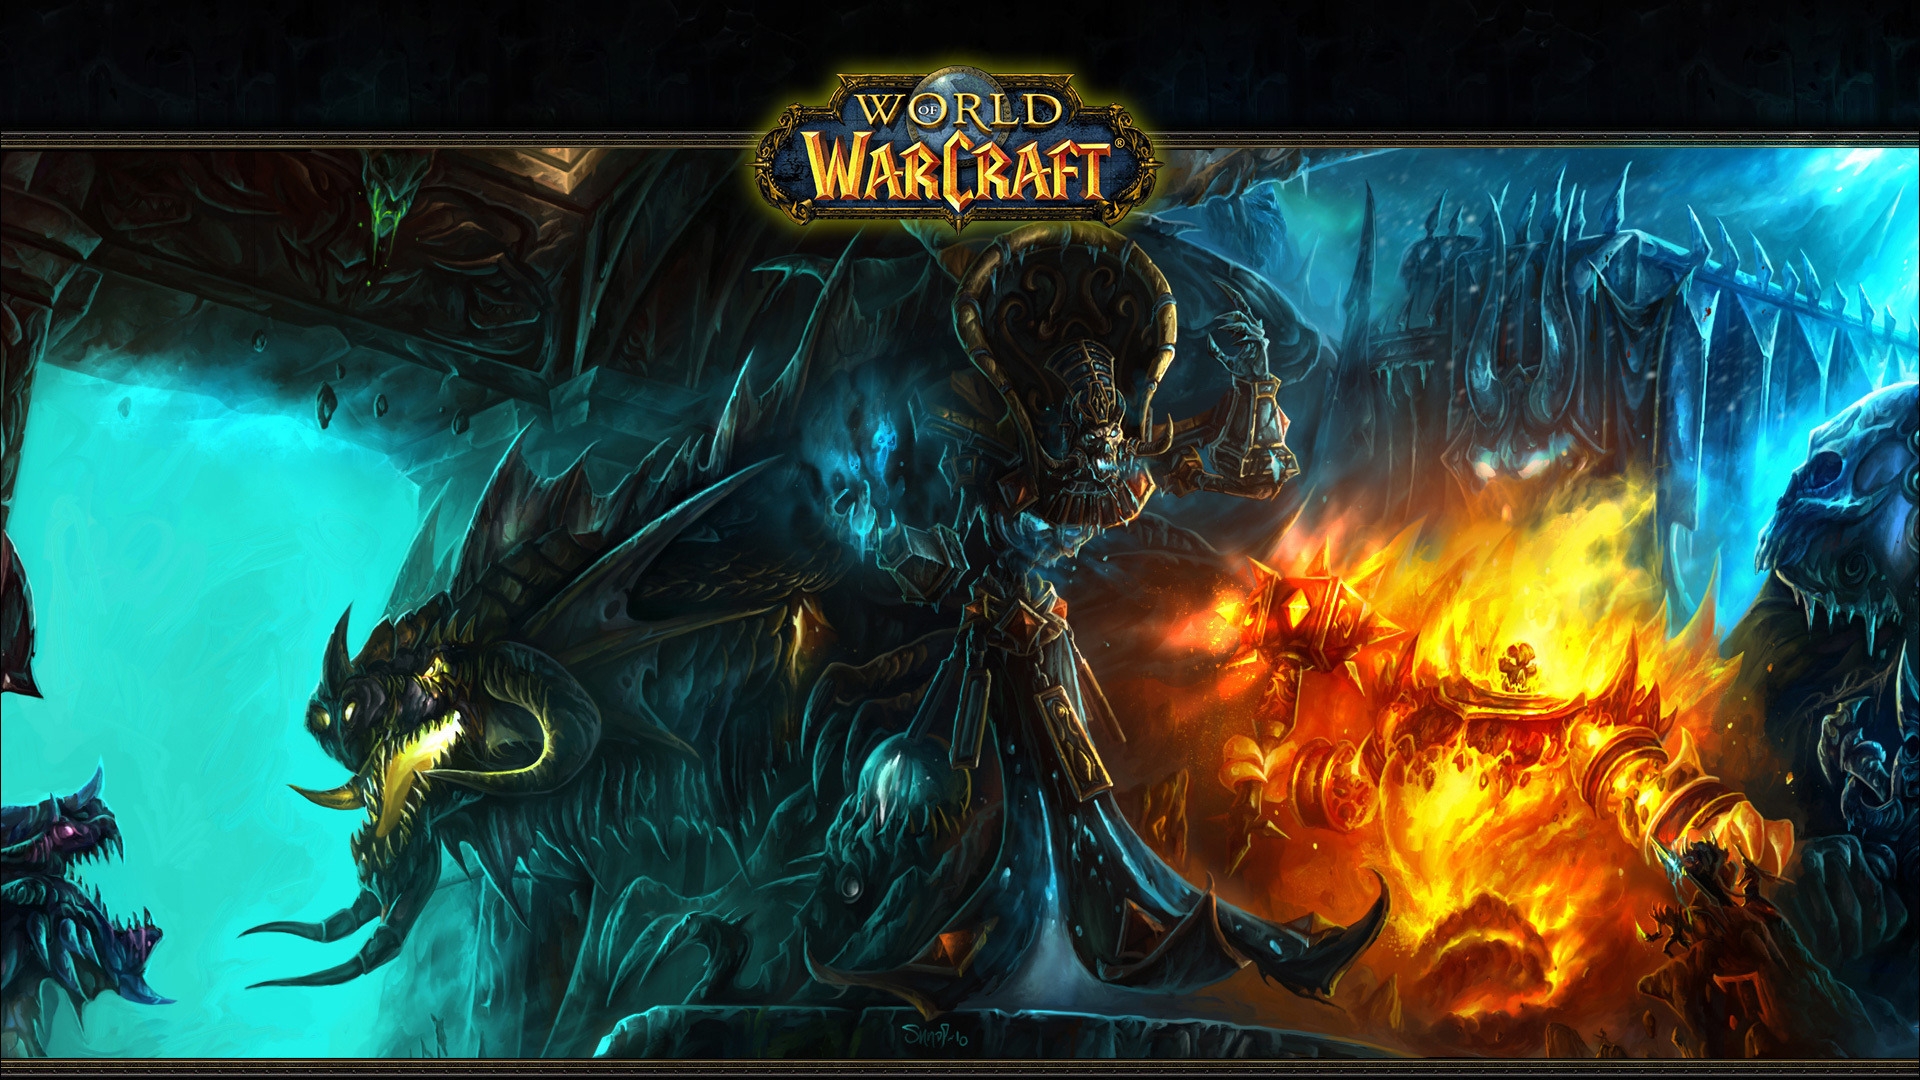 World of Warcraft Demons for 1920 x 1080 HDTV 1080p resolution